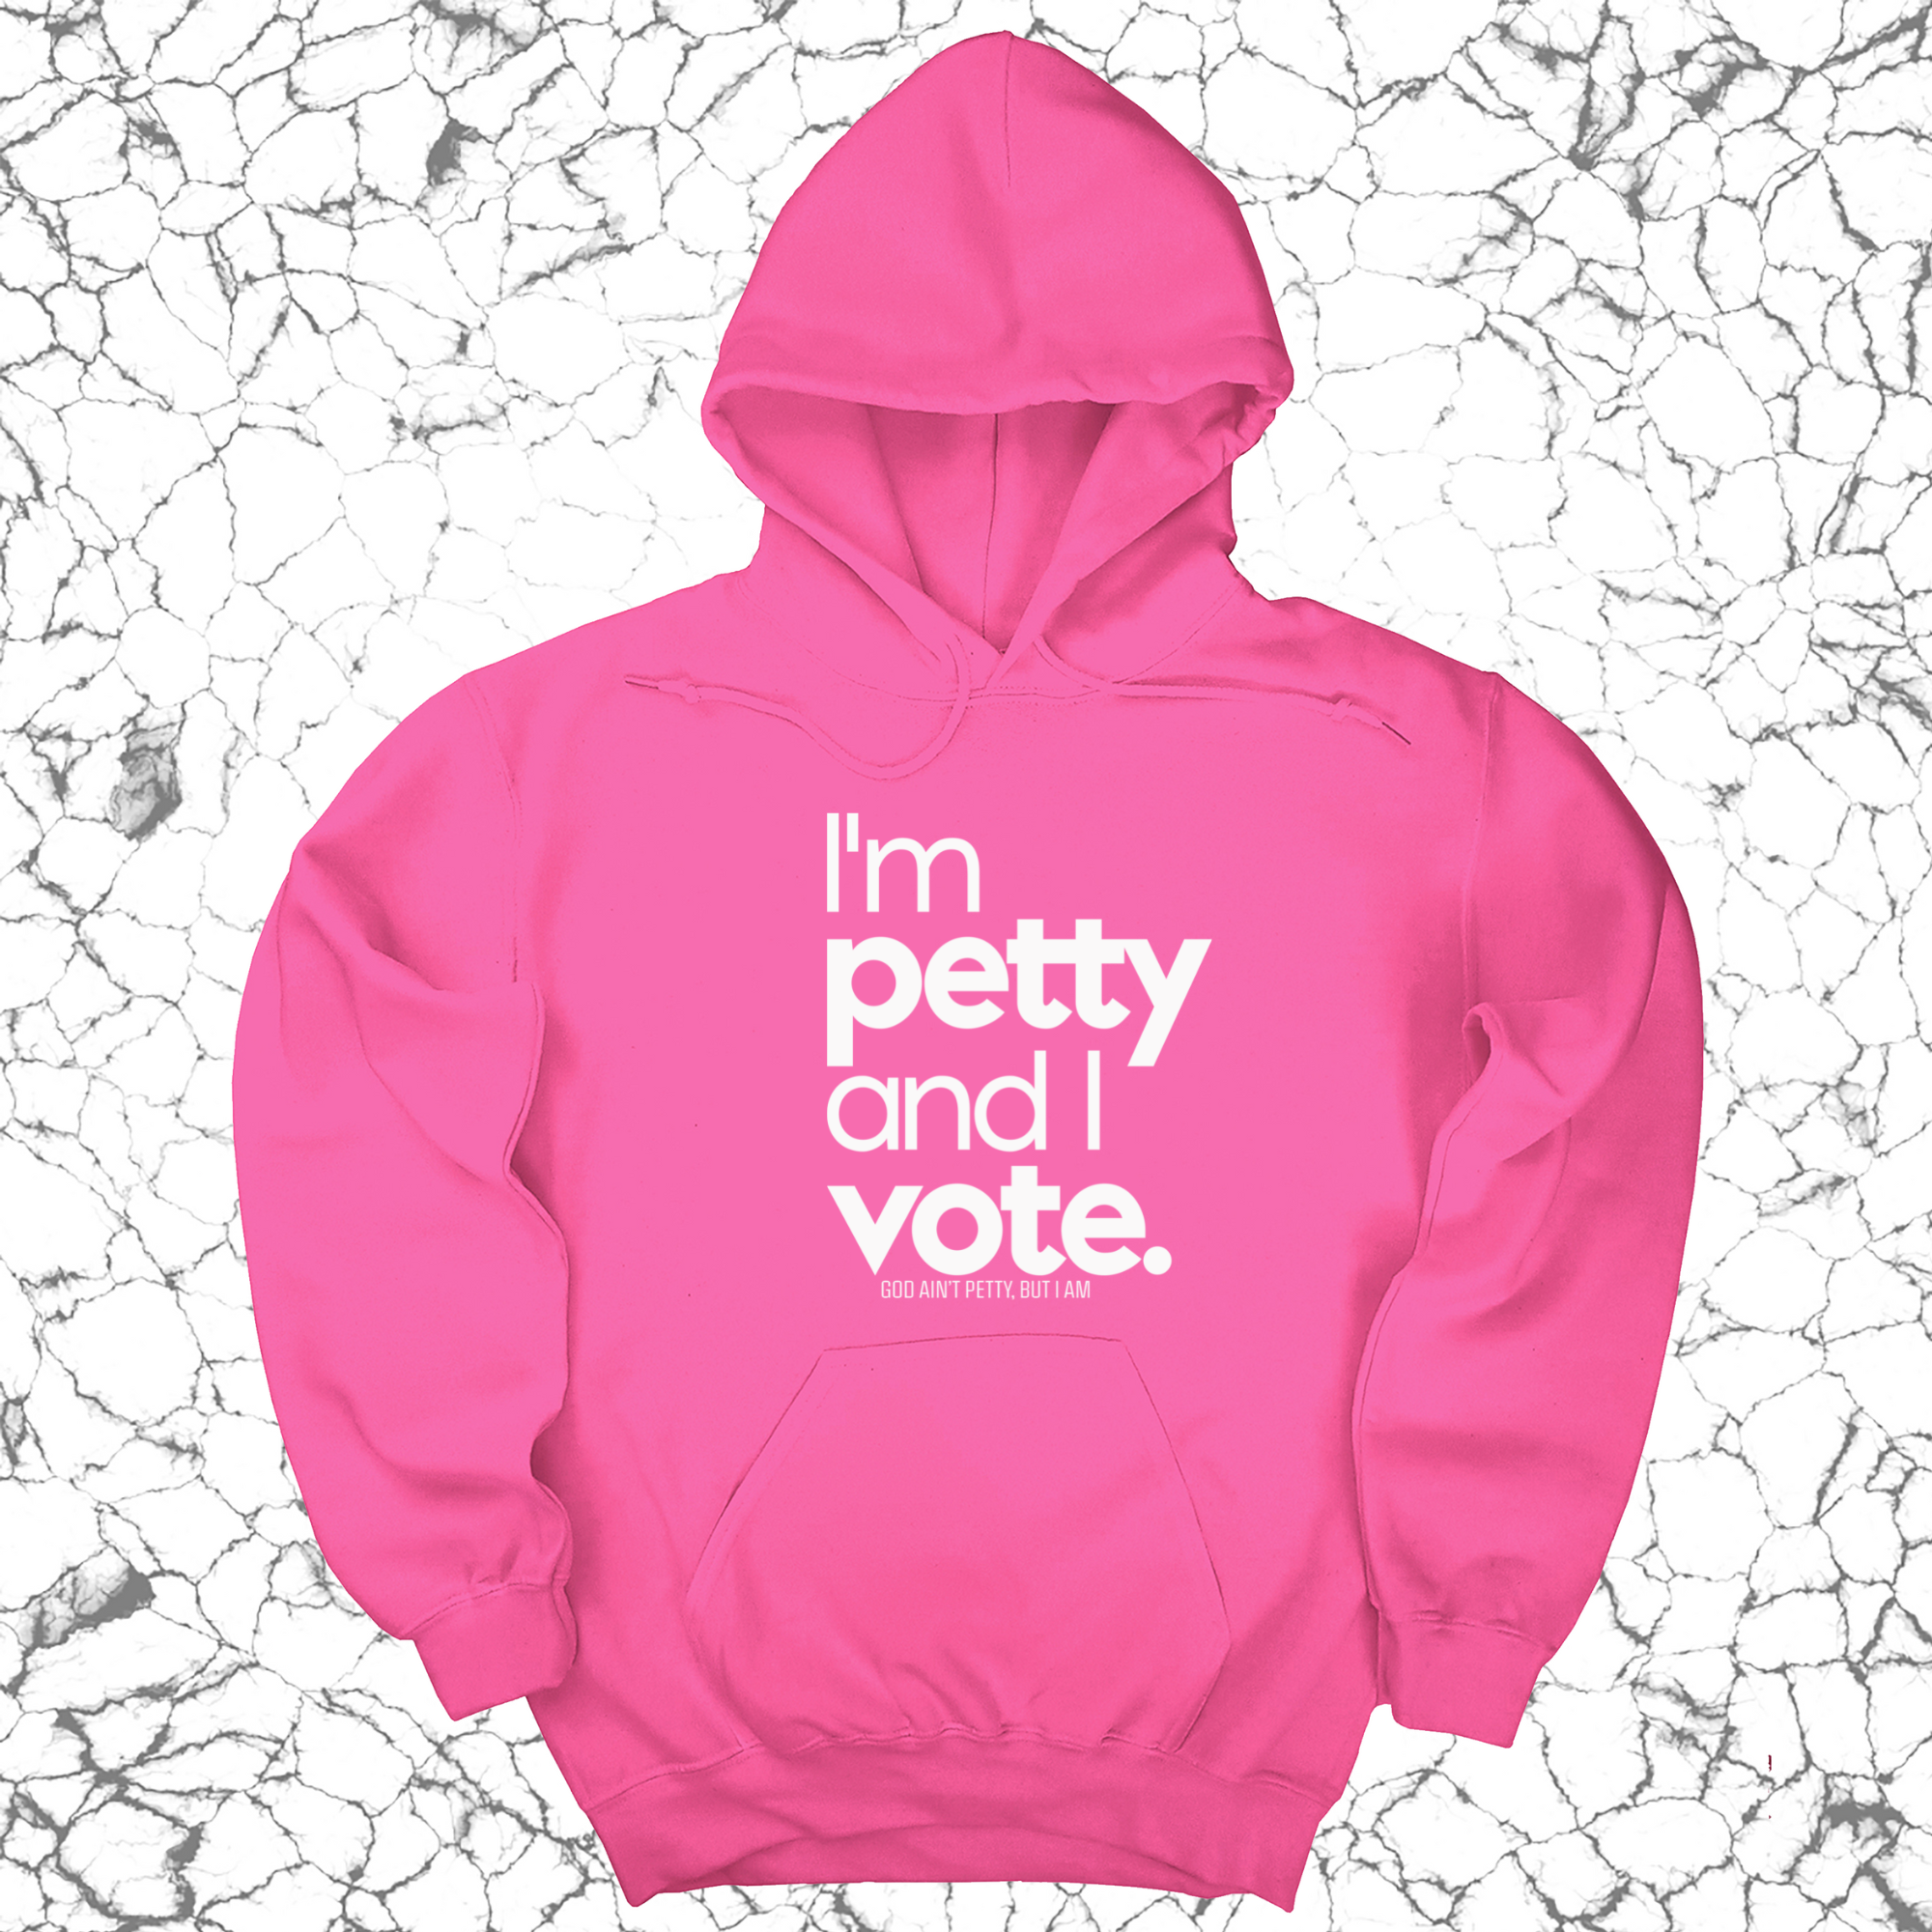 I'm petty and I vote Unisex Hoodie-Hoodie-The Original God Ain't Petty But I Am